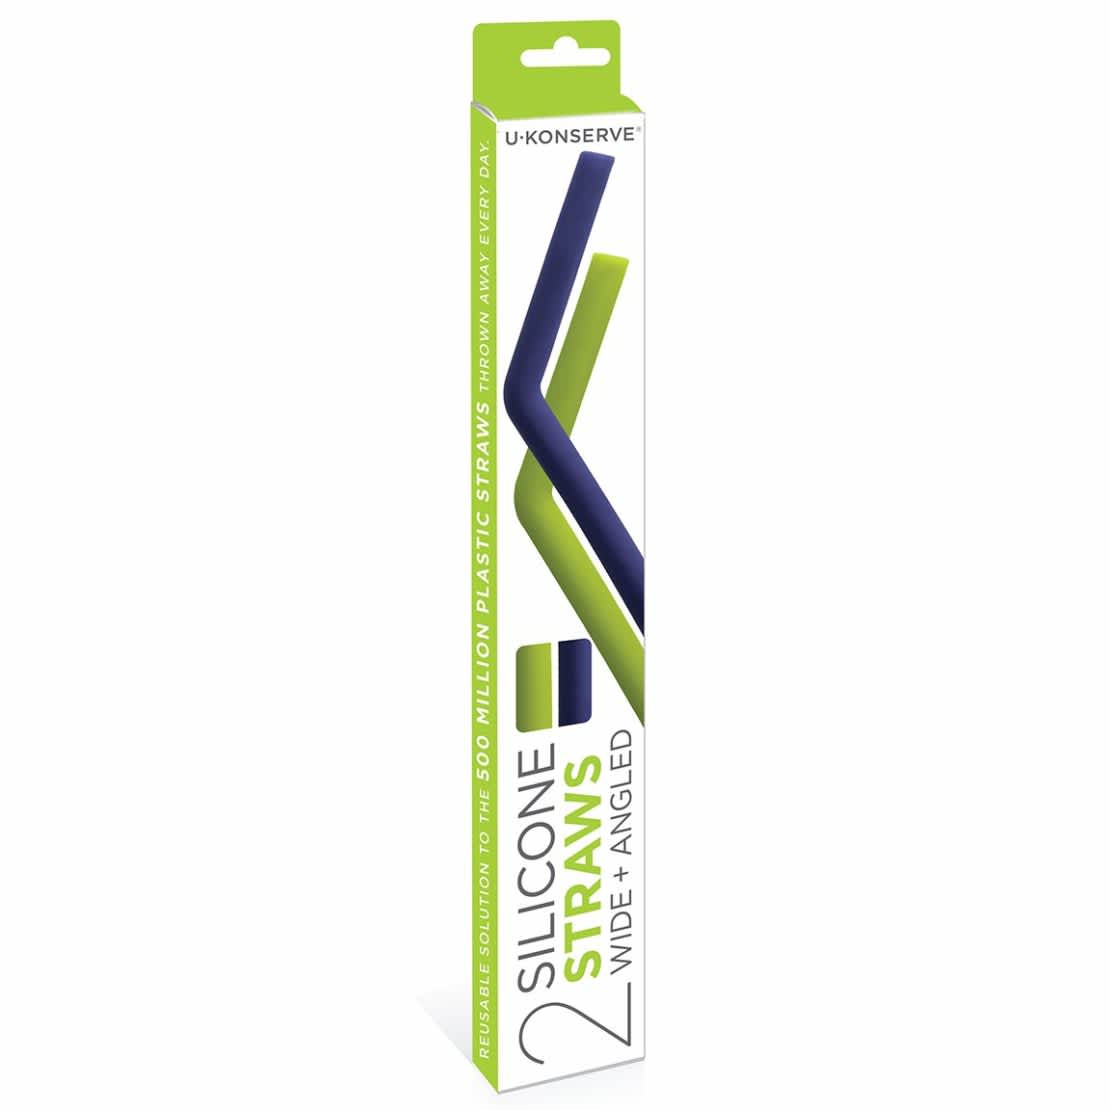 2 pack of U-Konserve brand silicone reusable straws